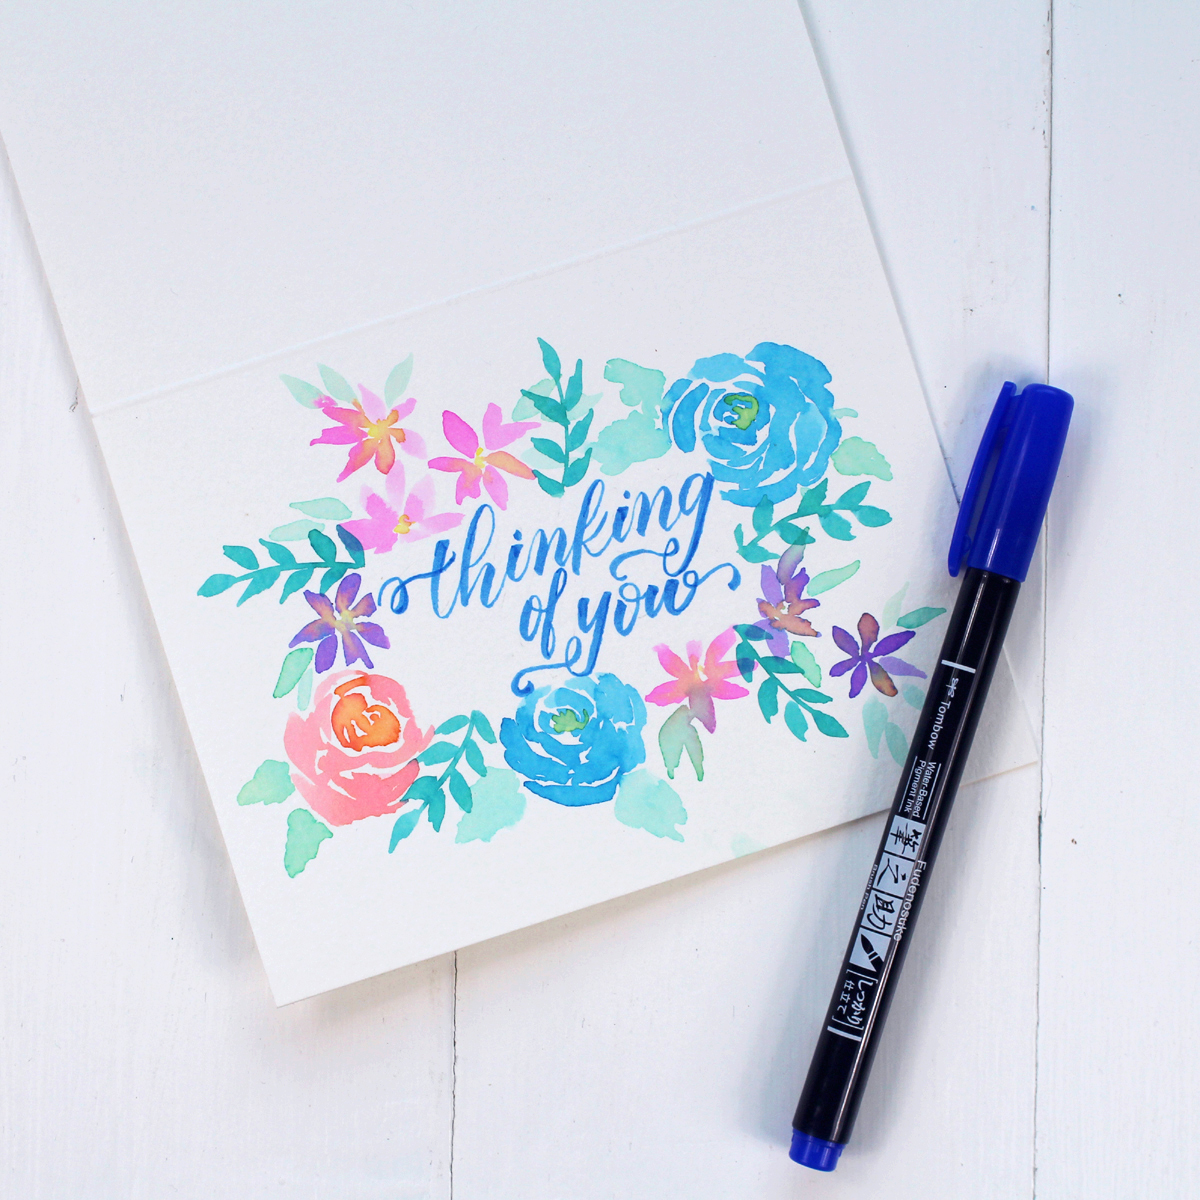 Use the Tombow Fudenosuke Pen to hand letter on the greeting card.